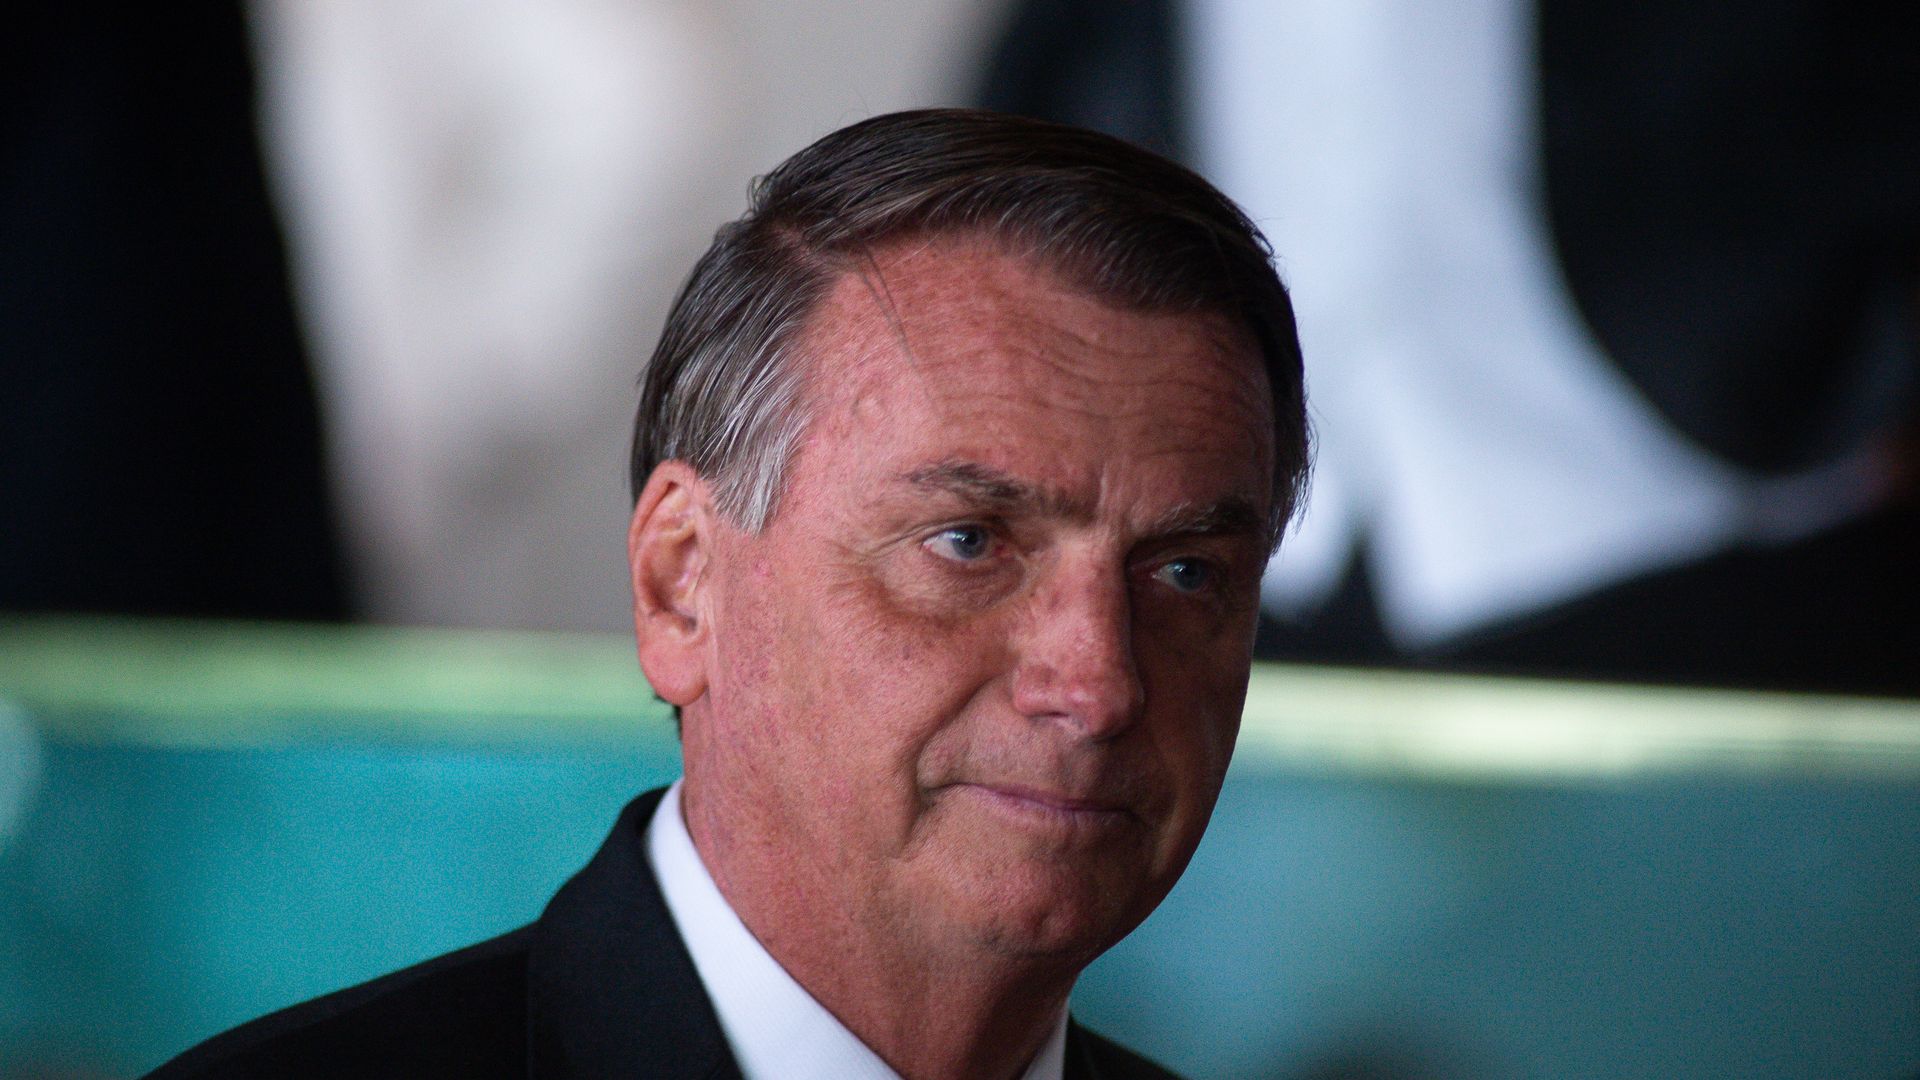 Photo of Jair Bolsonaro with a stern expression on his face